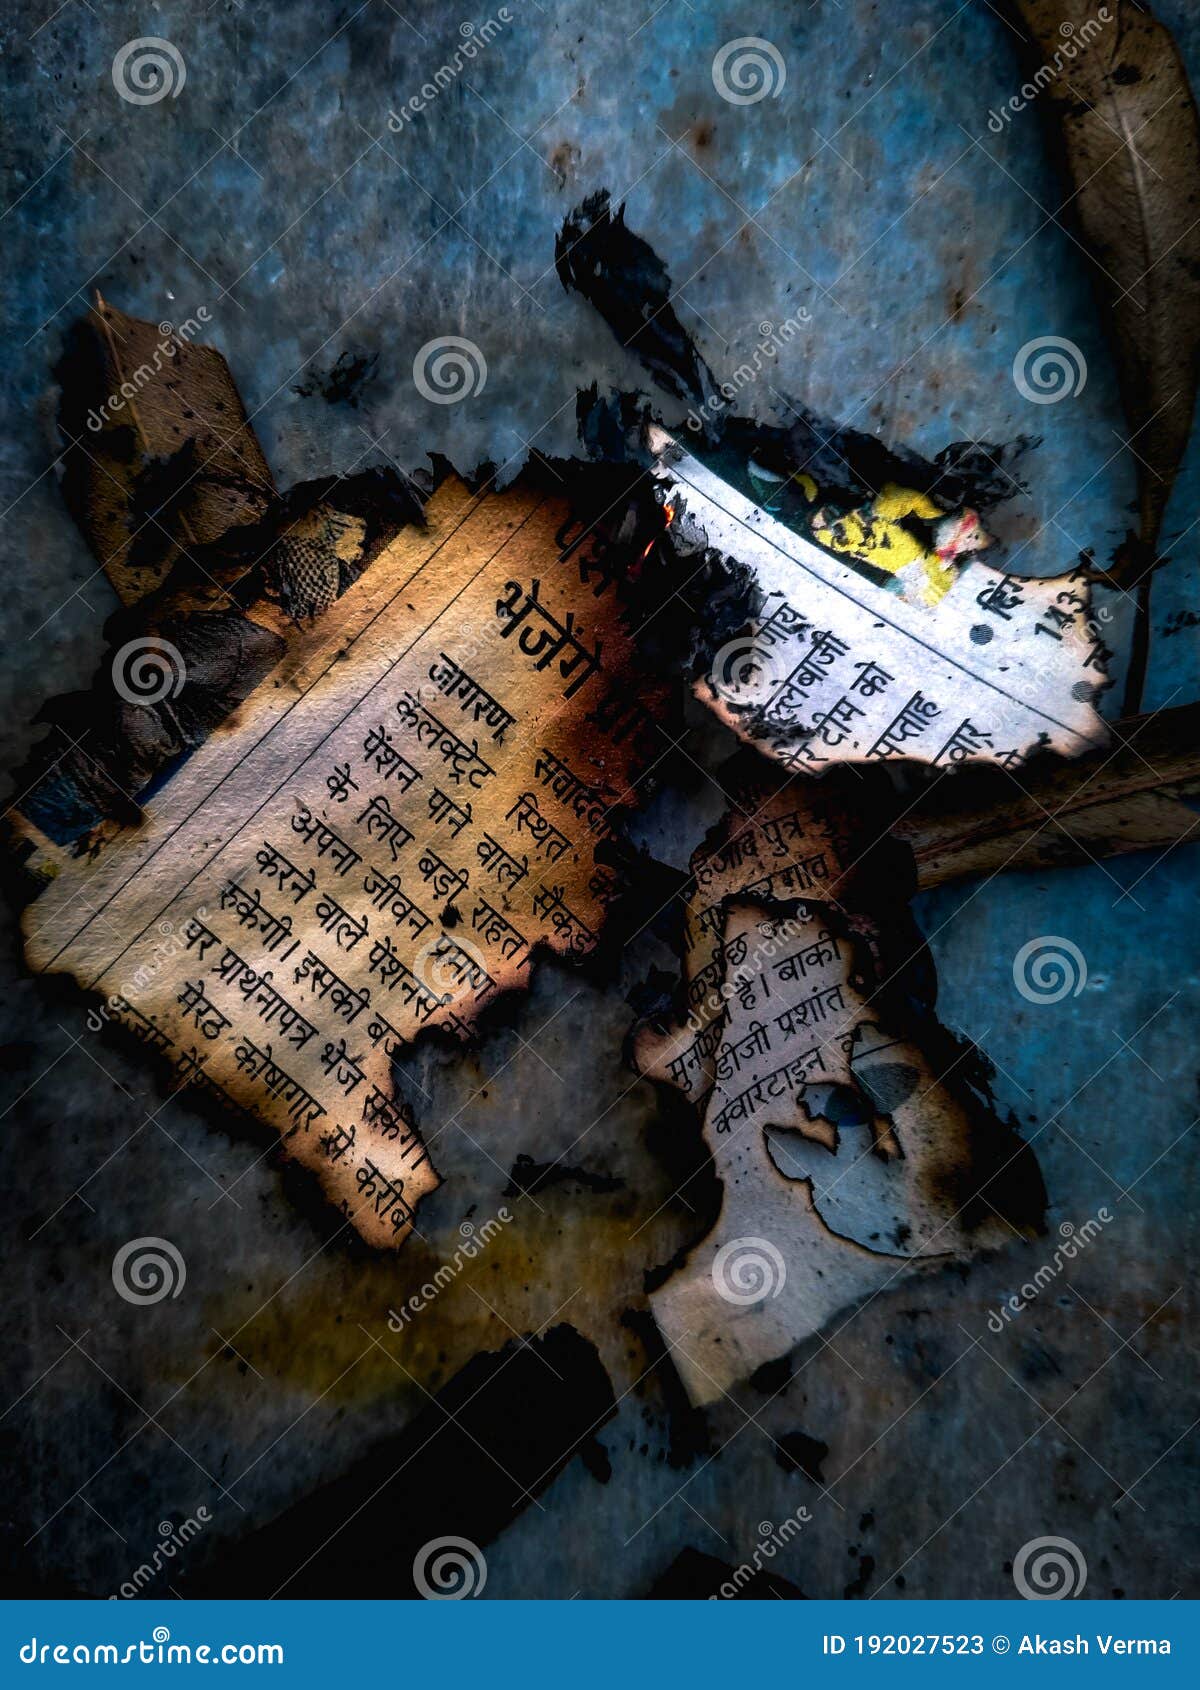 the burning page which show anyone who write wrong they should vanish